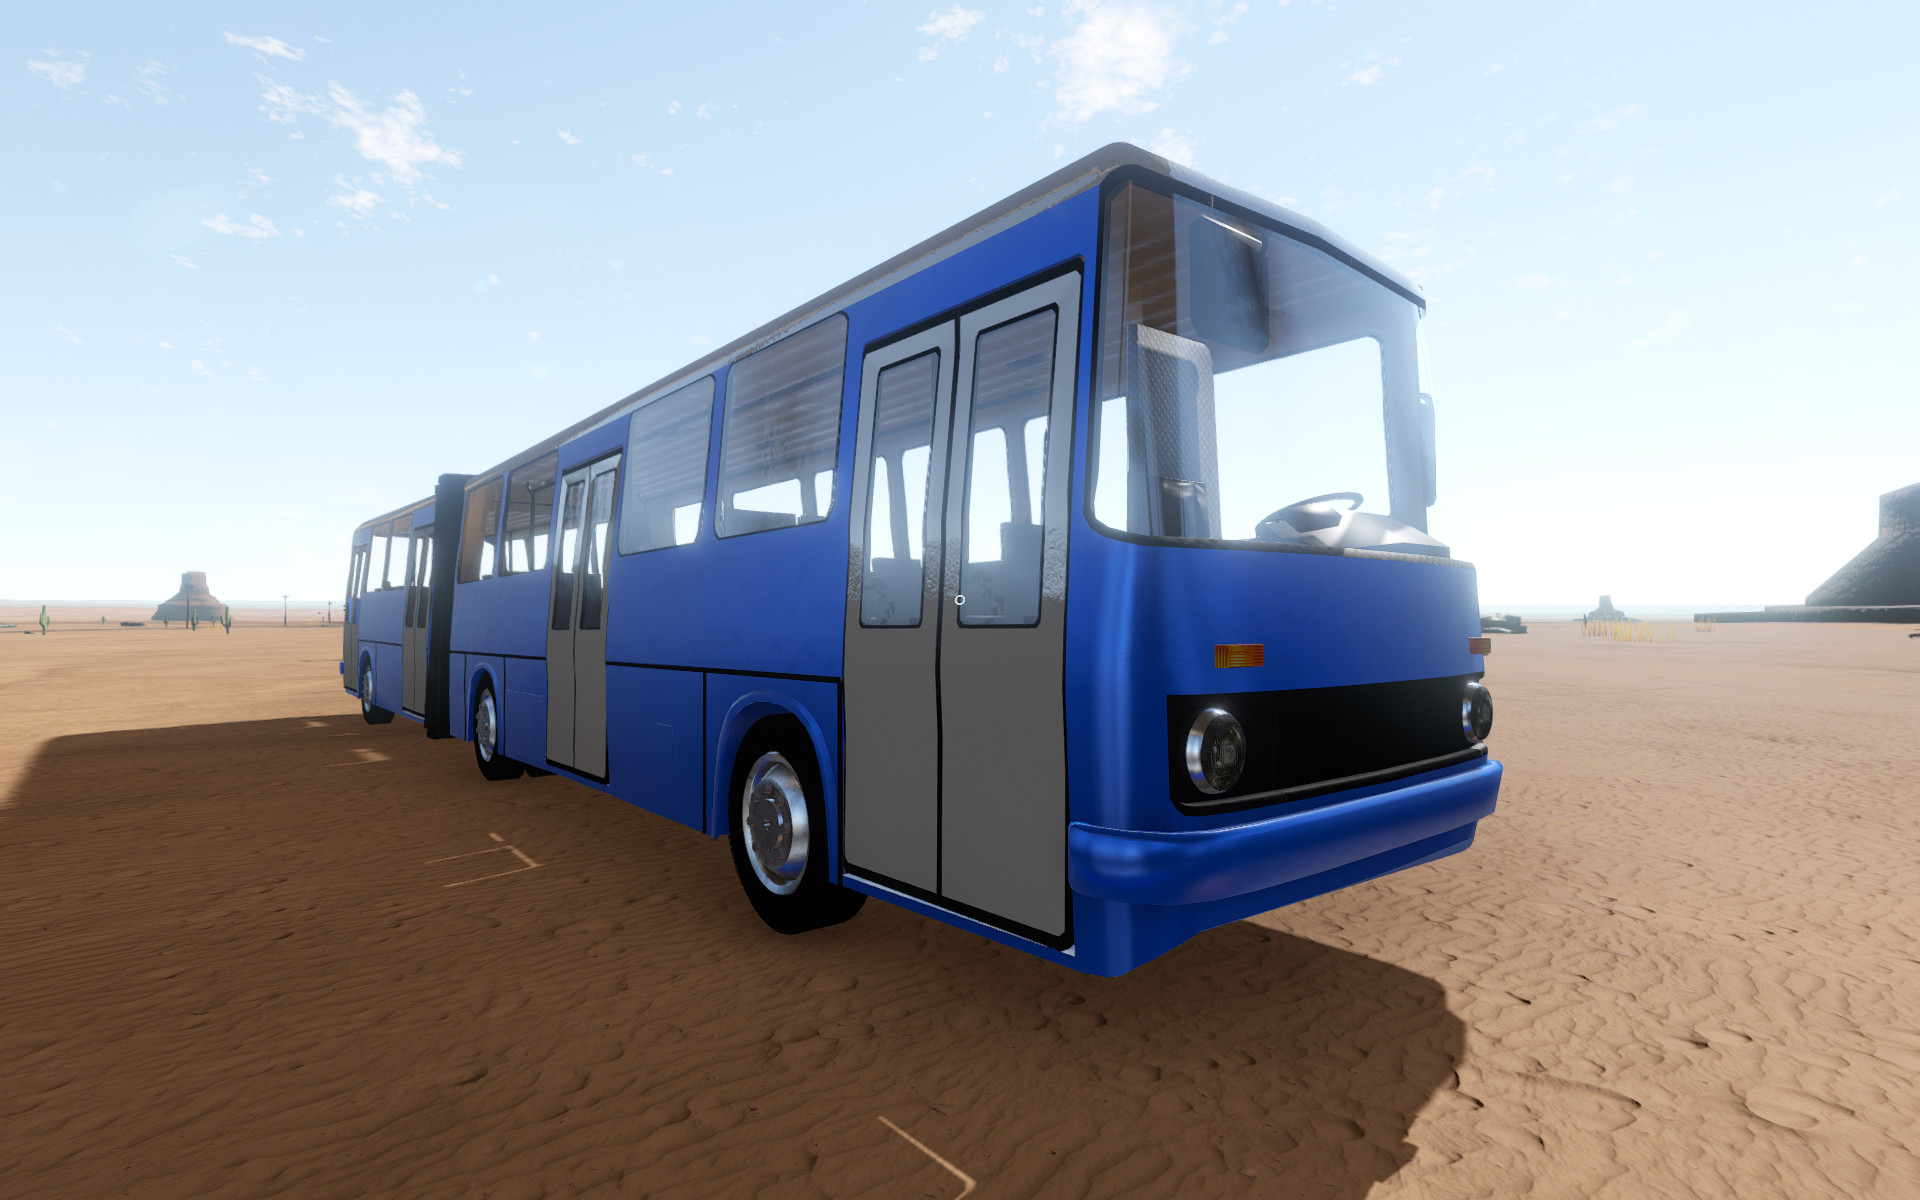 The Long Drive - All Types of Vehicle Wiki Guide - Ikarus 260/280 (Bus) - 01D6A52